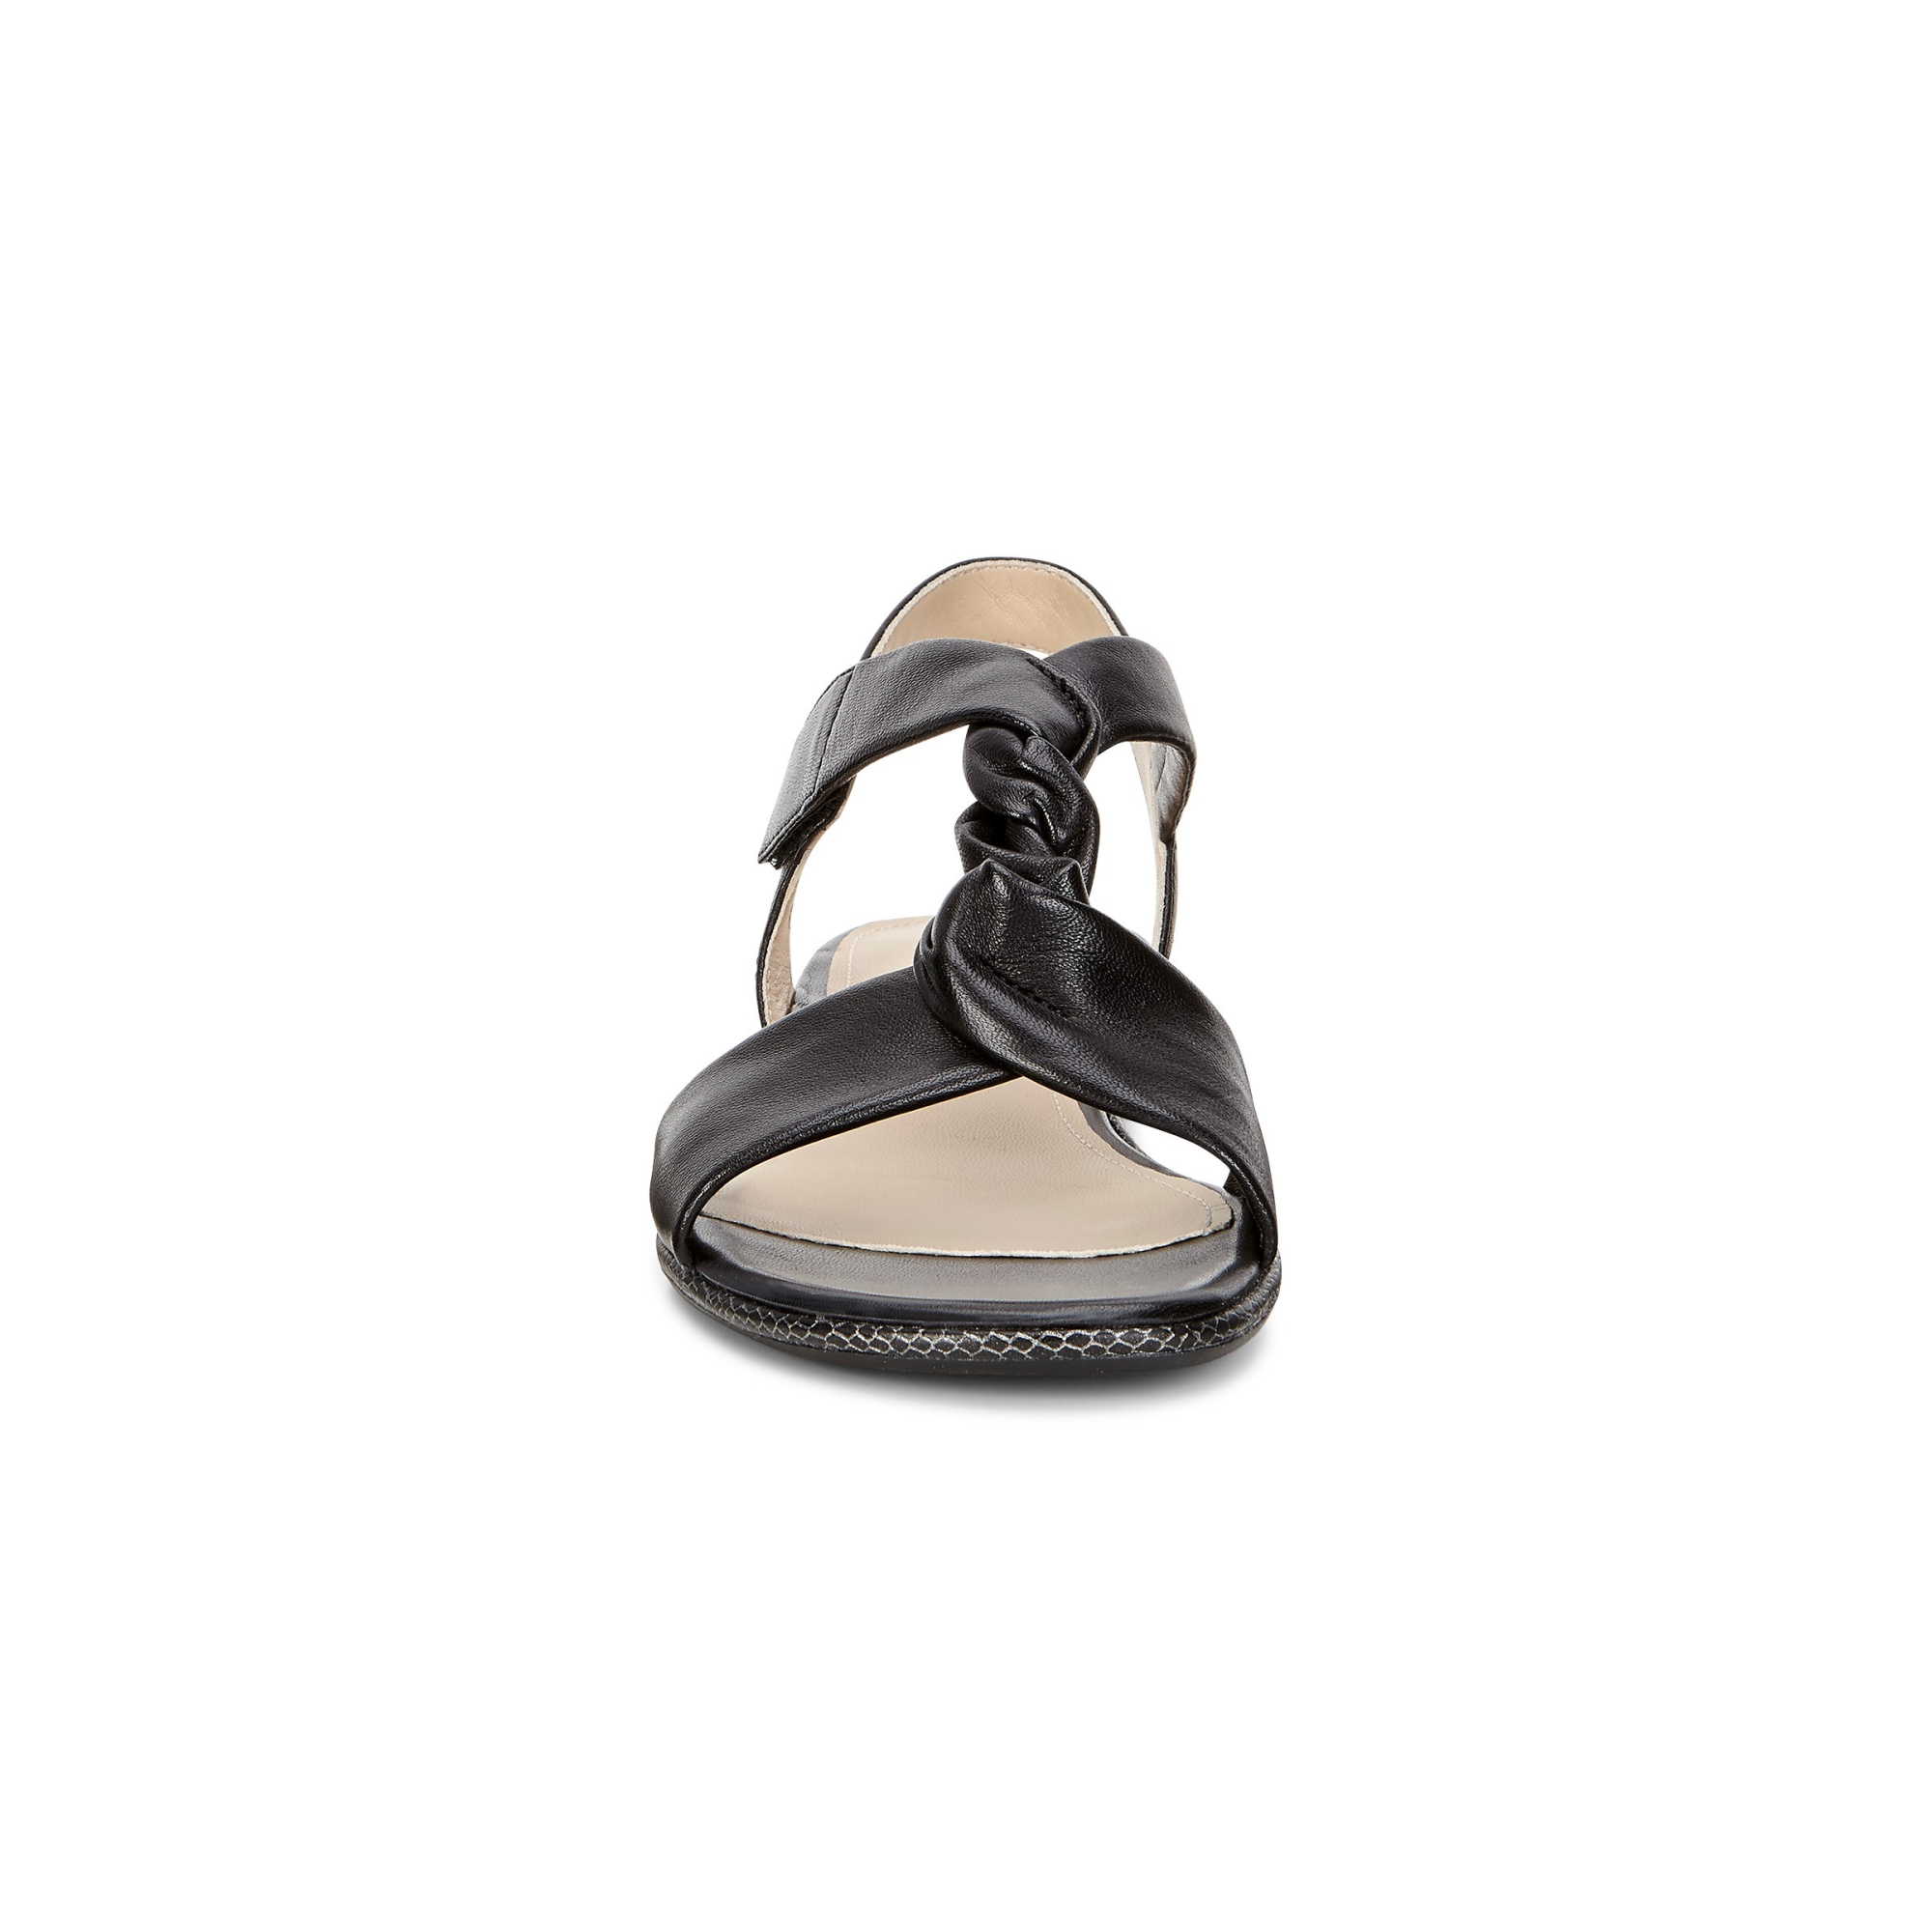 Ecco Sandal 3.0 40 - Products - Veryk Mall - Veryk Mall, many product, quick response, safe your money!